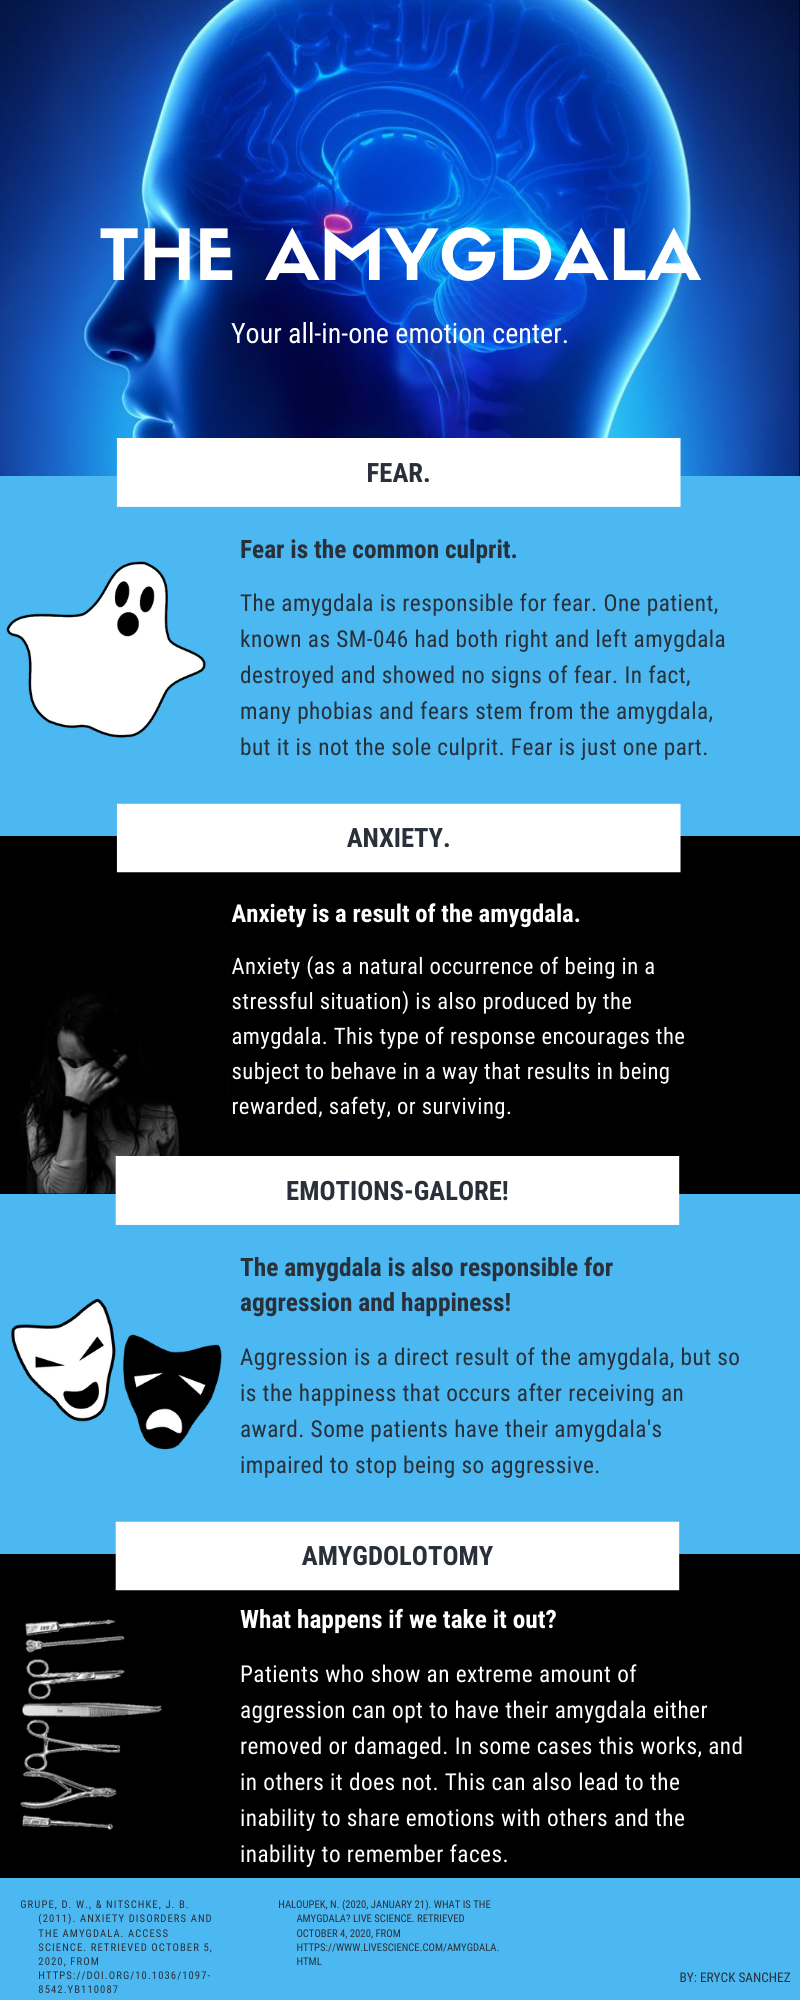 Blue, black, and white psychology infographic describing how fear, anxiety, anger, and happiness are produced through the amygdala's chemical responses to the human environment